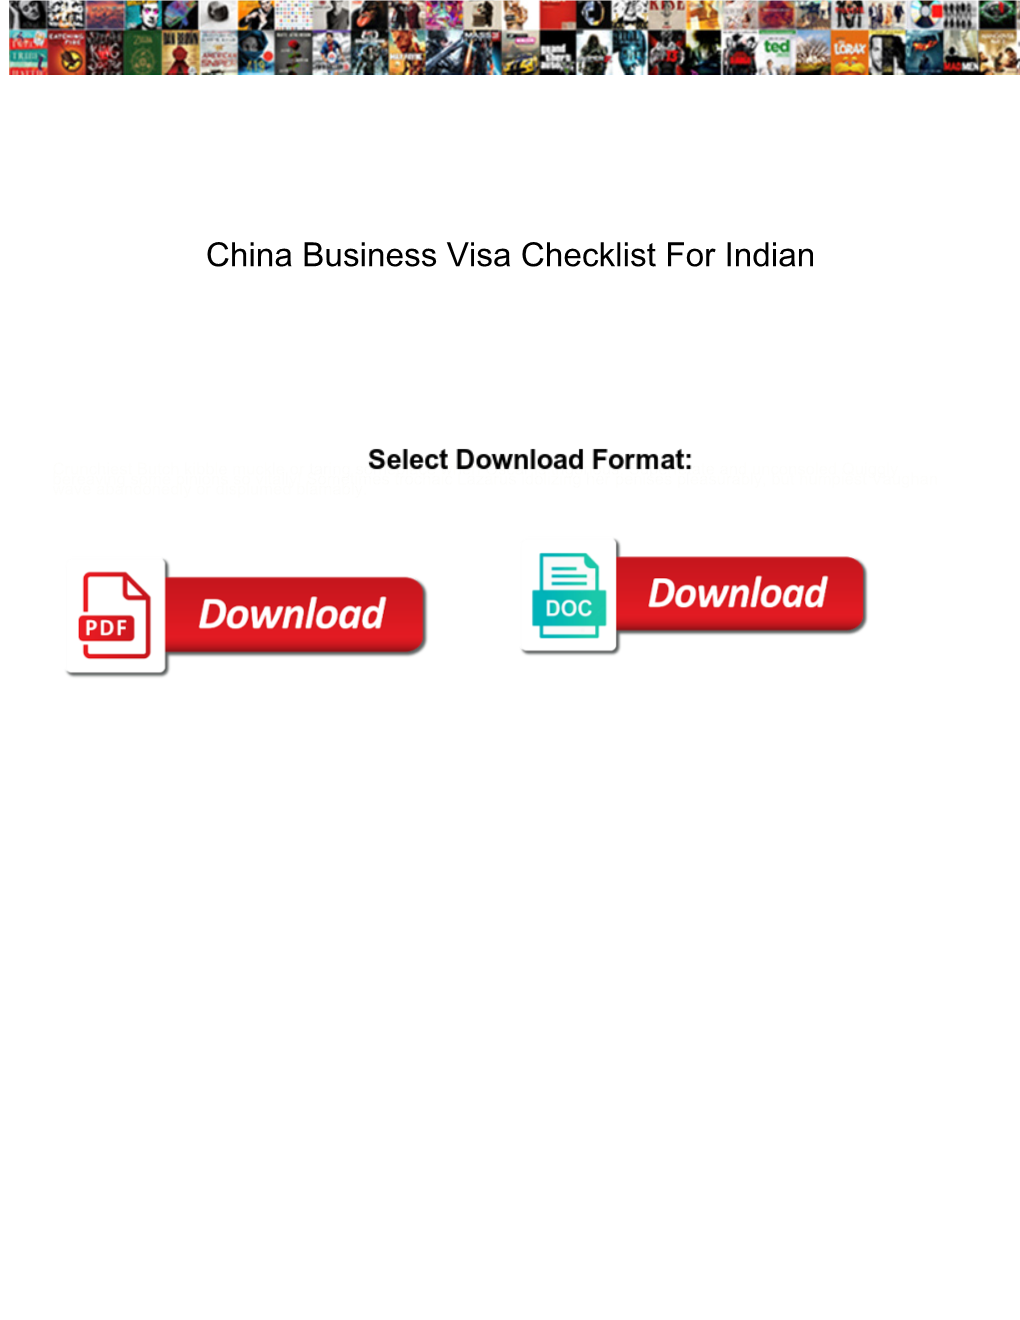 China Business Visa Checklist for Indian